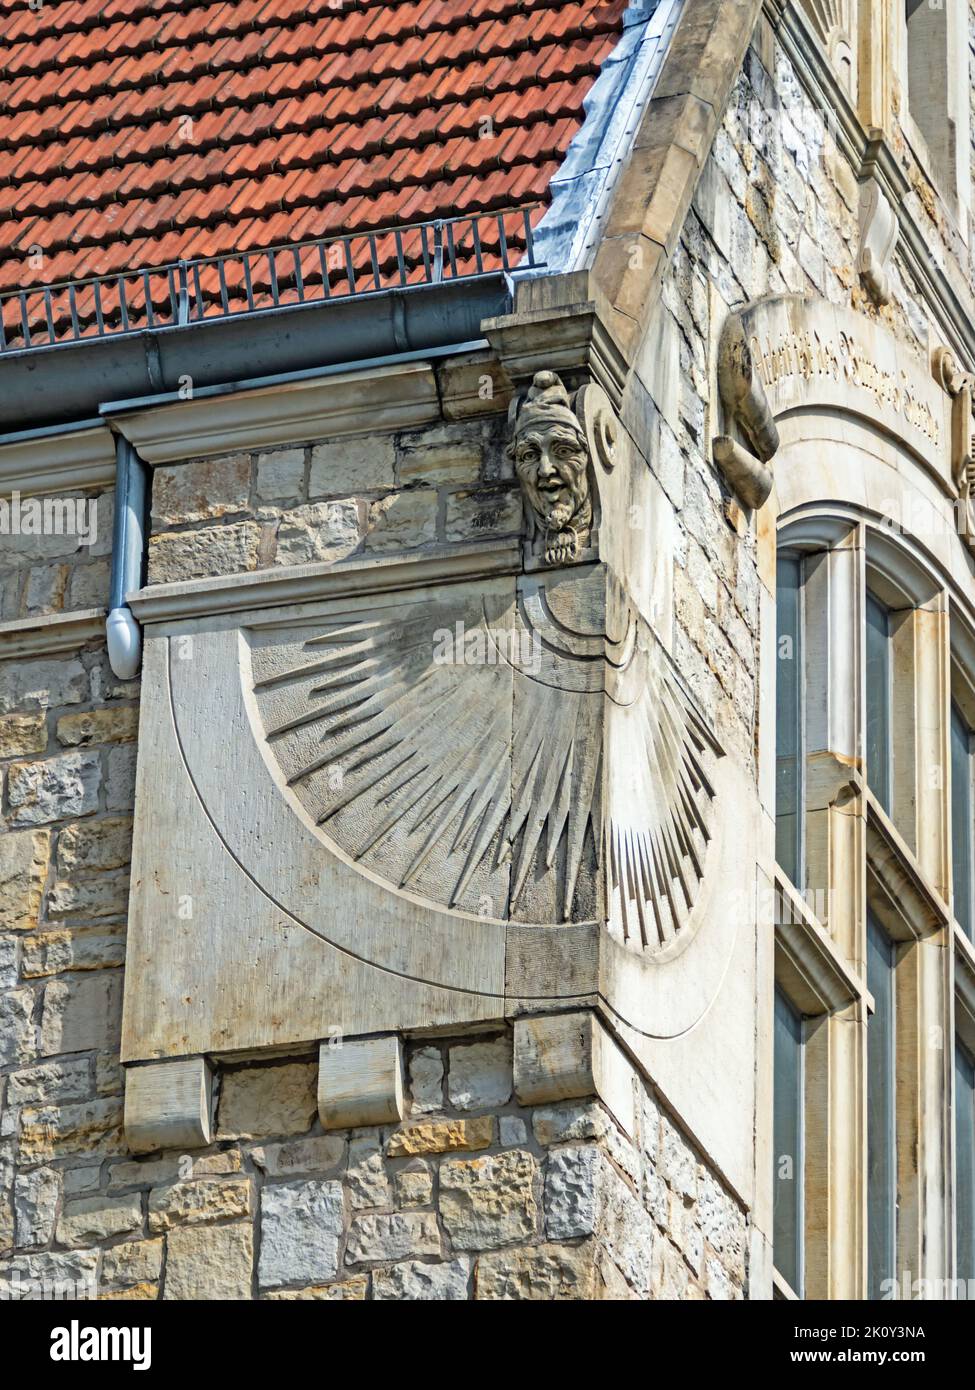 Bückeburg, Lower Saxony, Germany - 17 July 2021: Sundial on the facade of the town hall of the city of Bückeburg Stock Photo